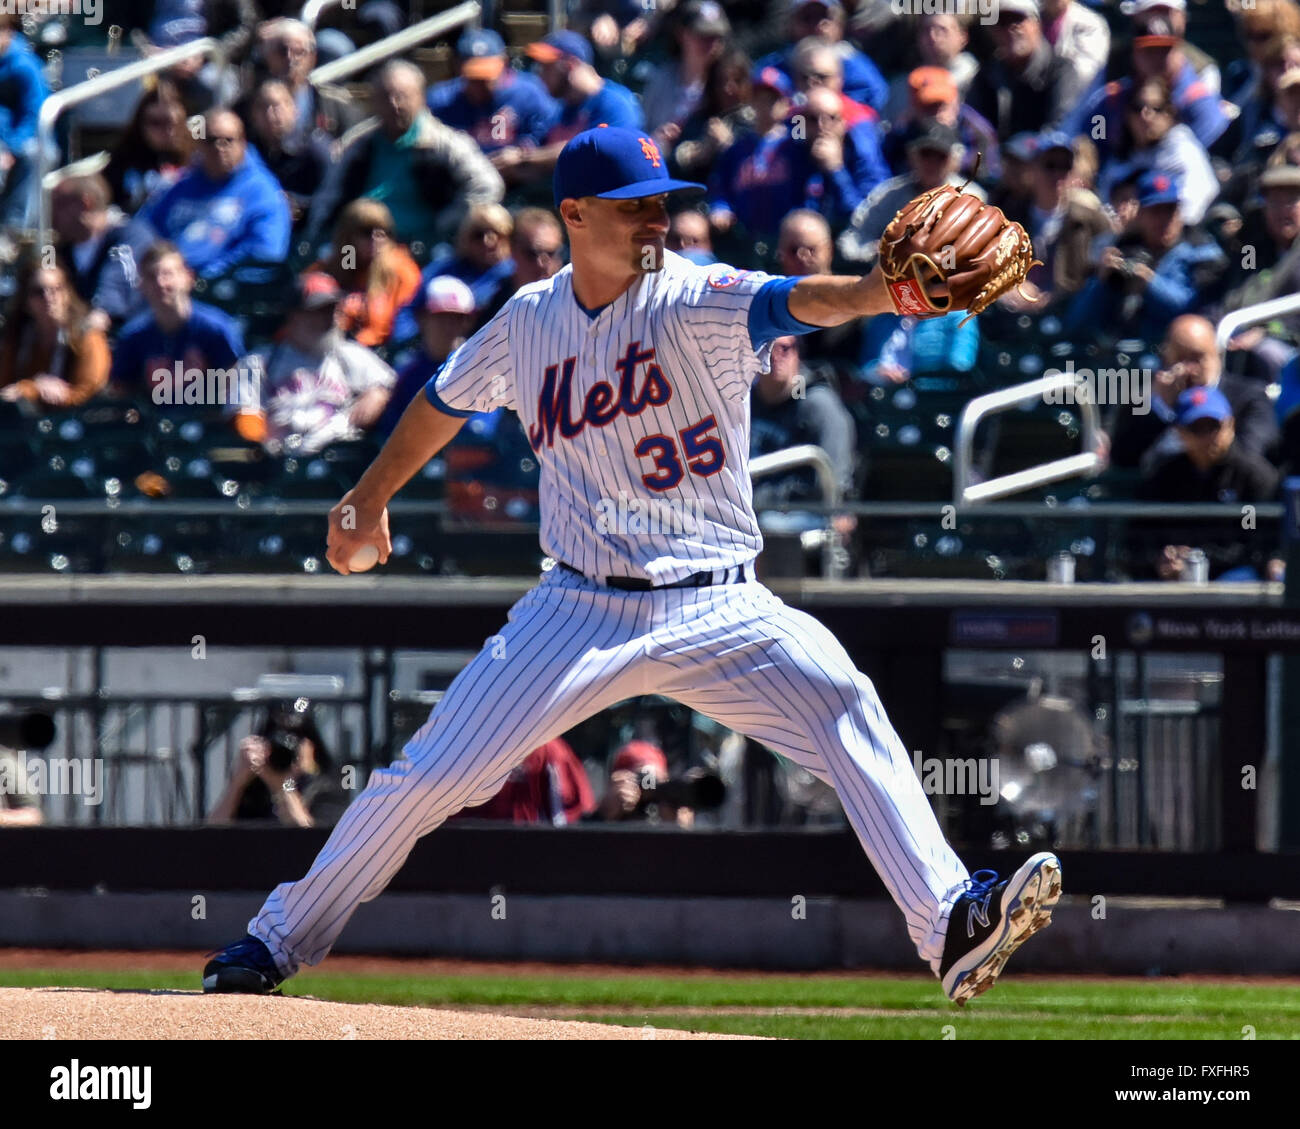 Flushing, New York, USA. 13th Apr, 2016. Logan Verrett (Mets) MLB : Logan Verrett of the New York Mets pitches in the first inning during the Major League Baseball game against the Miami Marlins at Citi Field in Flushing, New York, United States . © Hiroaki Yamaguchi/AFLO/Alamy Live News Stock Photo